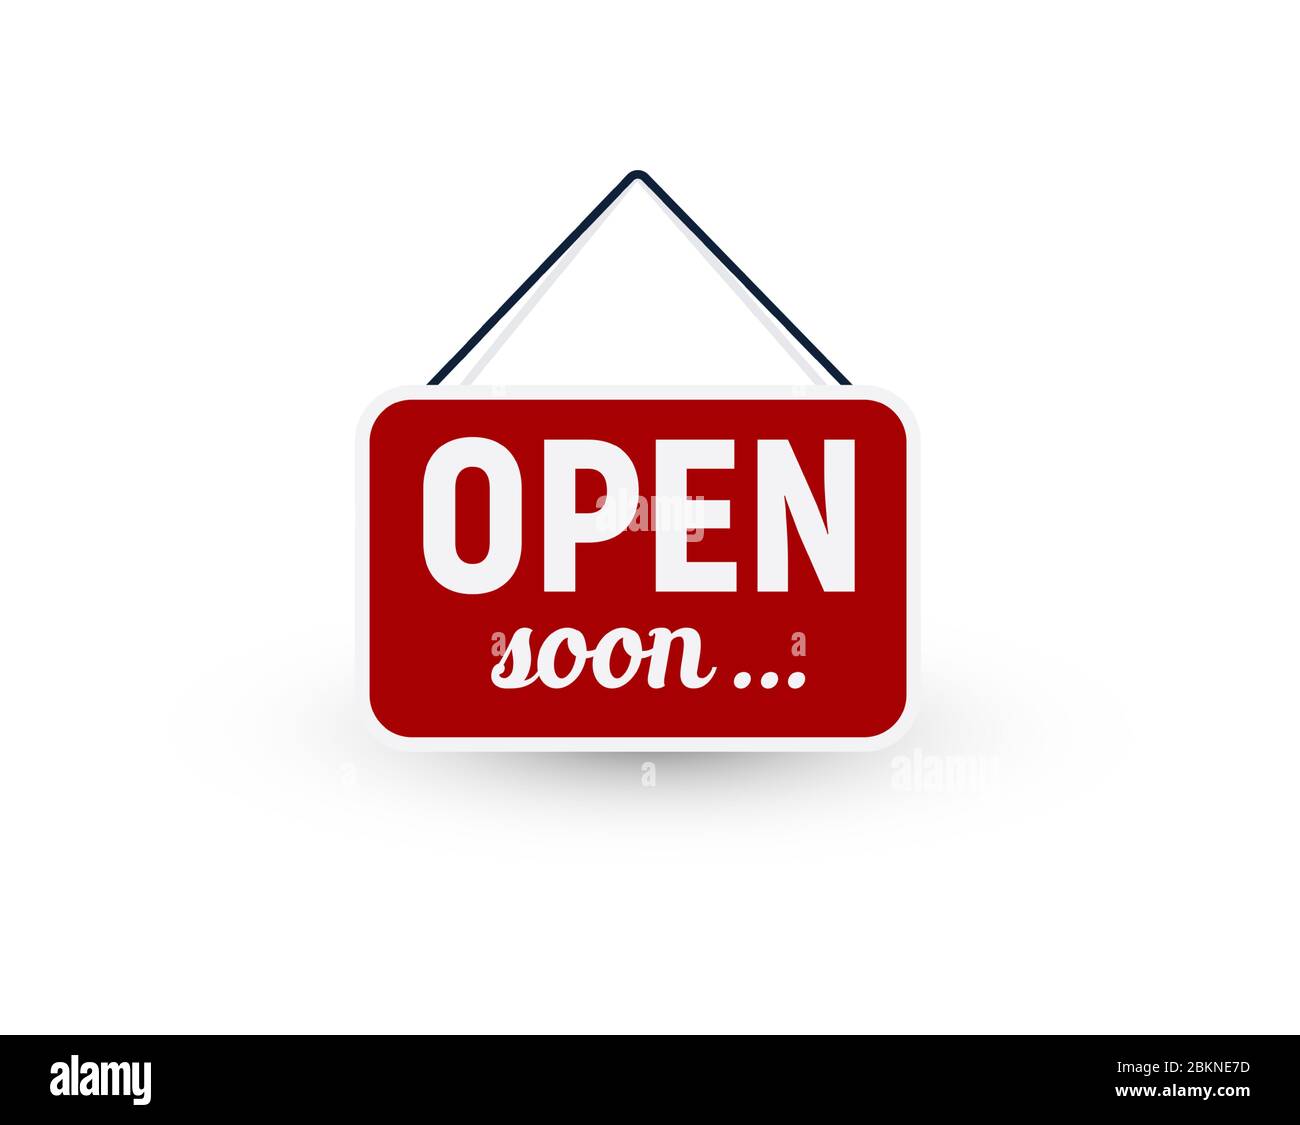 Opening Business Sign Reopening Open Soon Announce Red Signboard